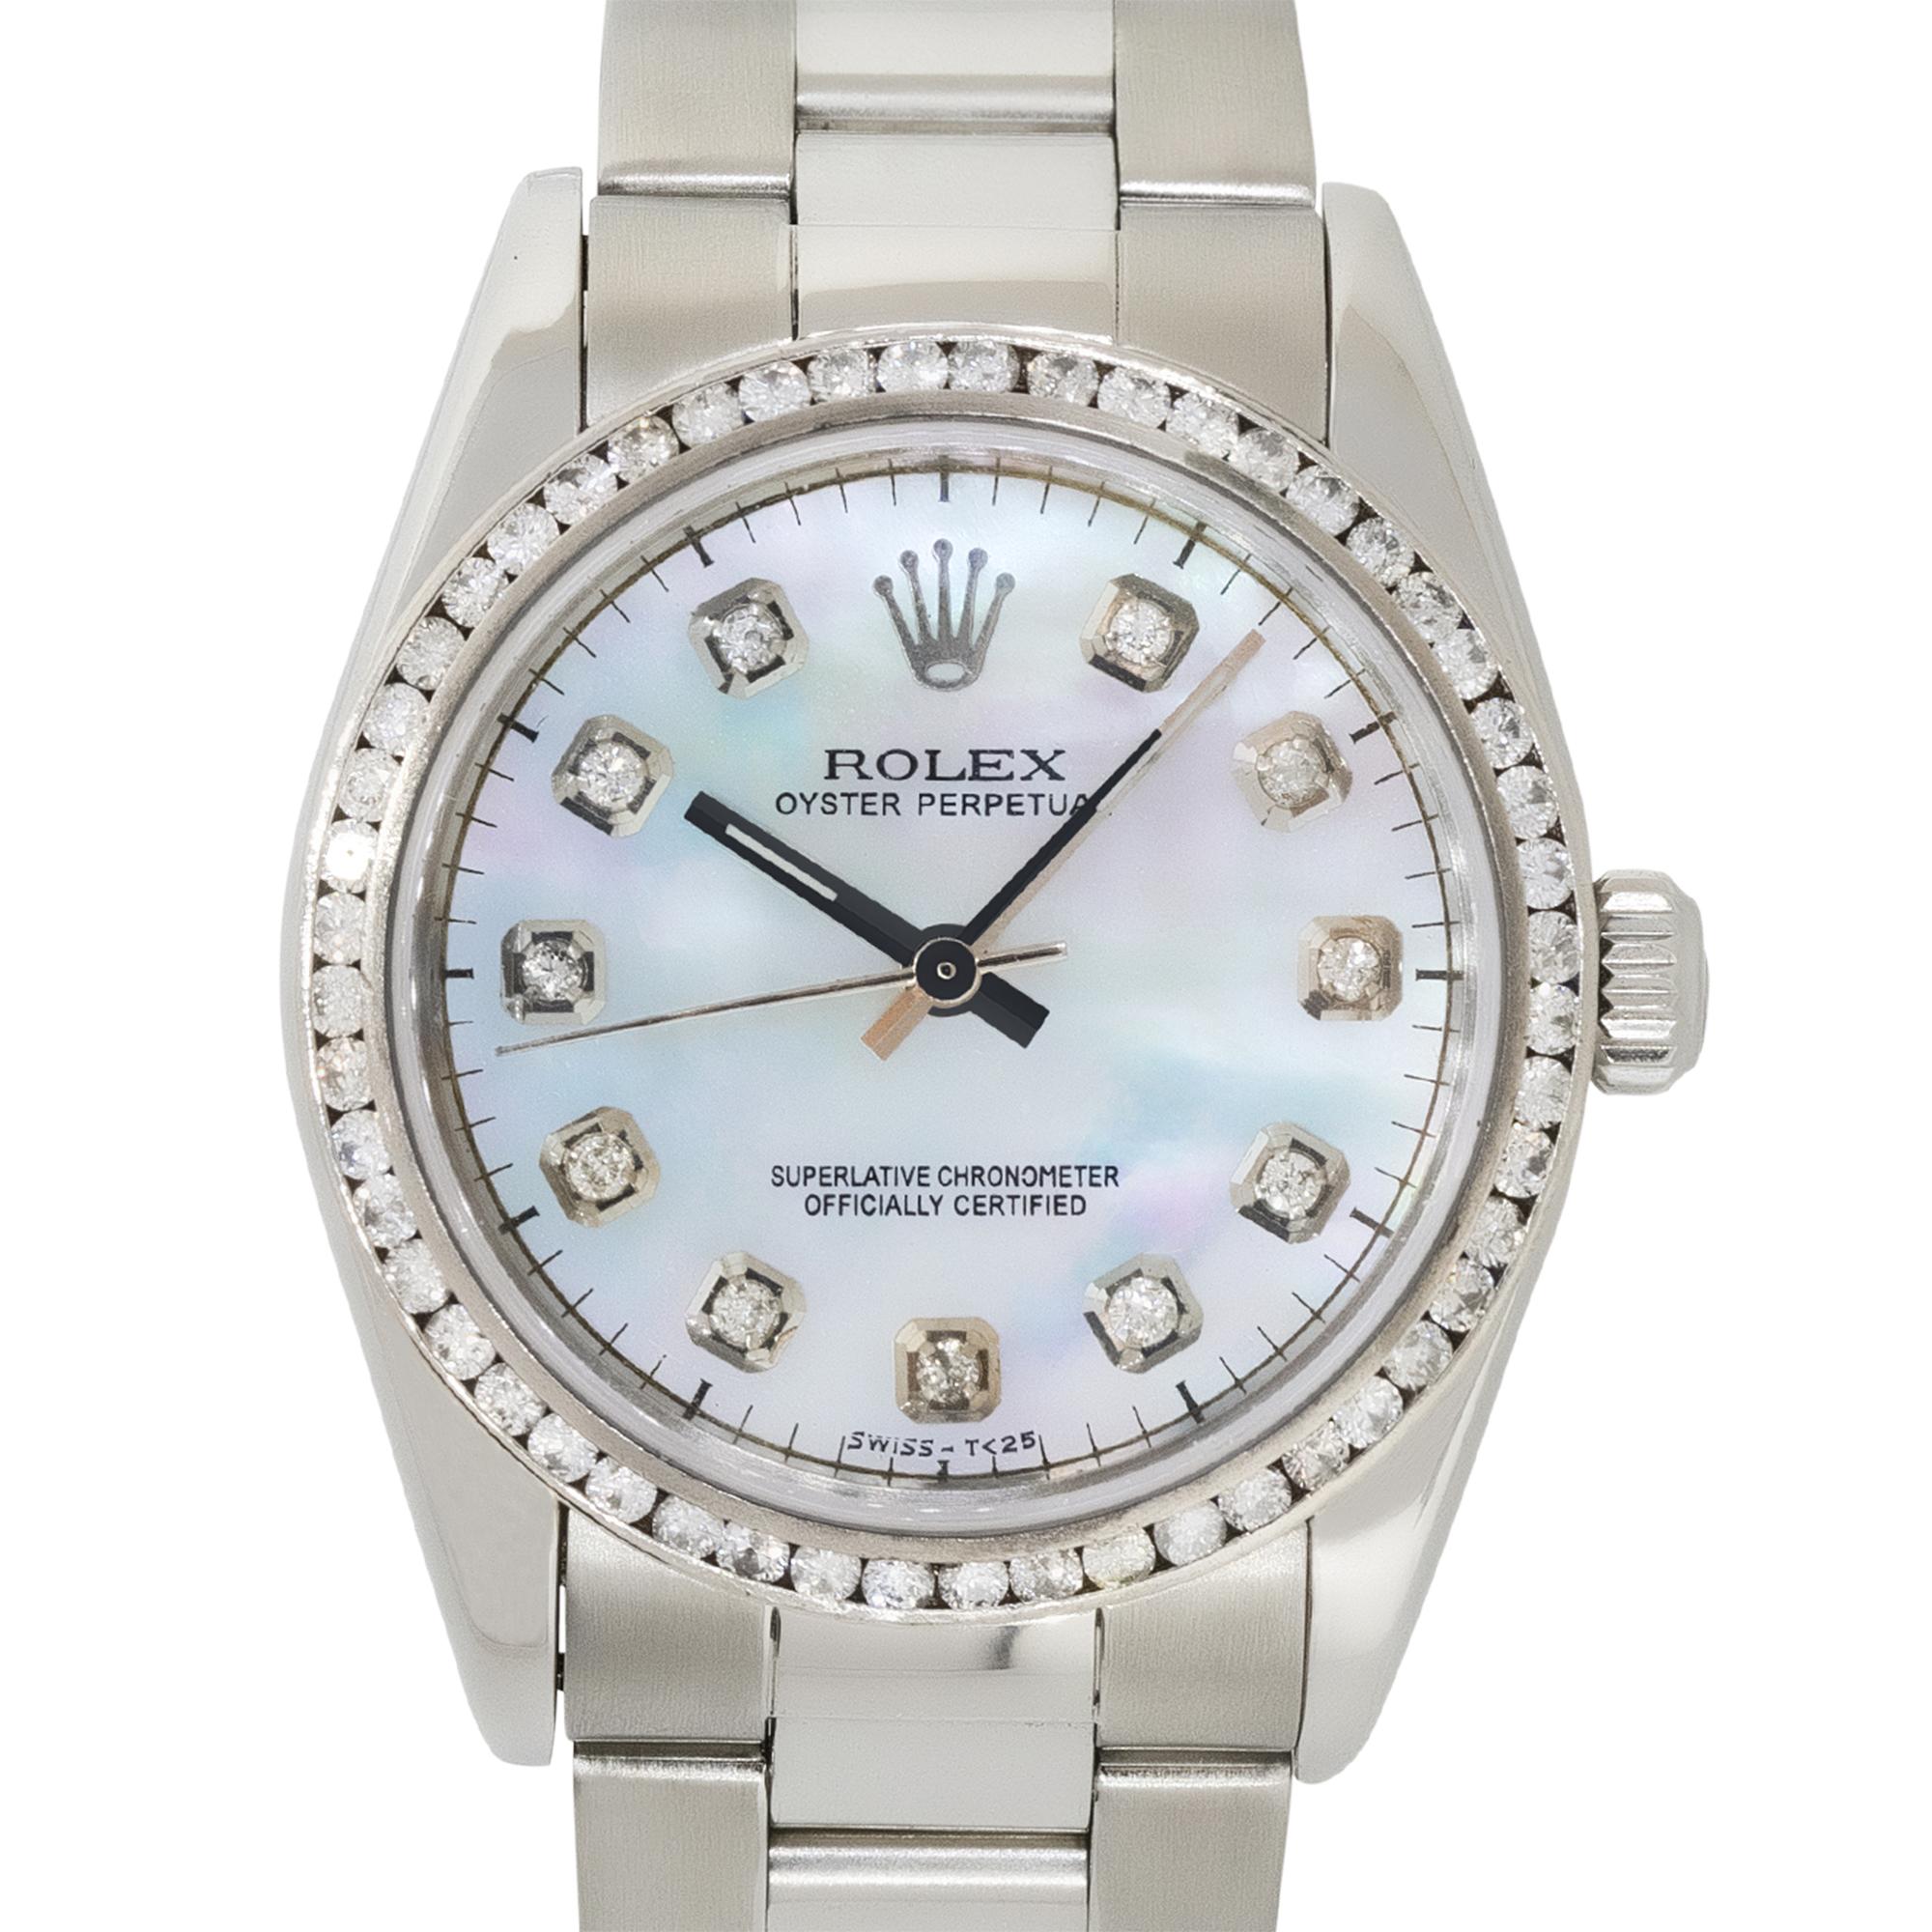 Brand: Rolex
Model: Oyster Perpetual
Reference Number: 77080
Case Measurement: 31 mm
Case Material: Stainless Steel
Dial: Mother of Pearl dial with silver hands and Diamond markers
Bezel: Diamond Bezel
Bracelet: Stainless steel Oyster